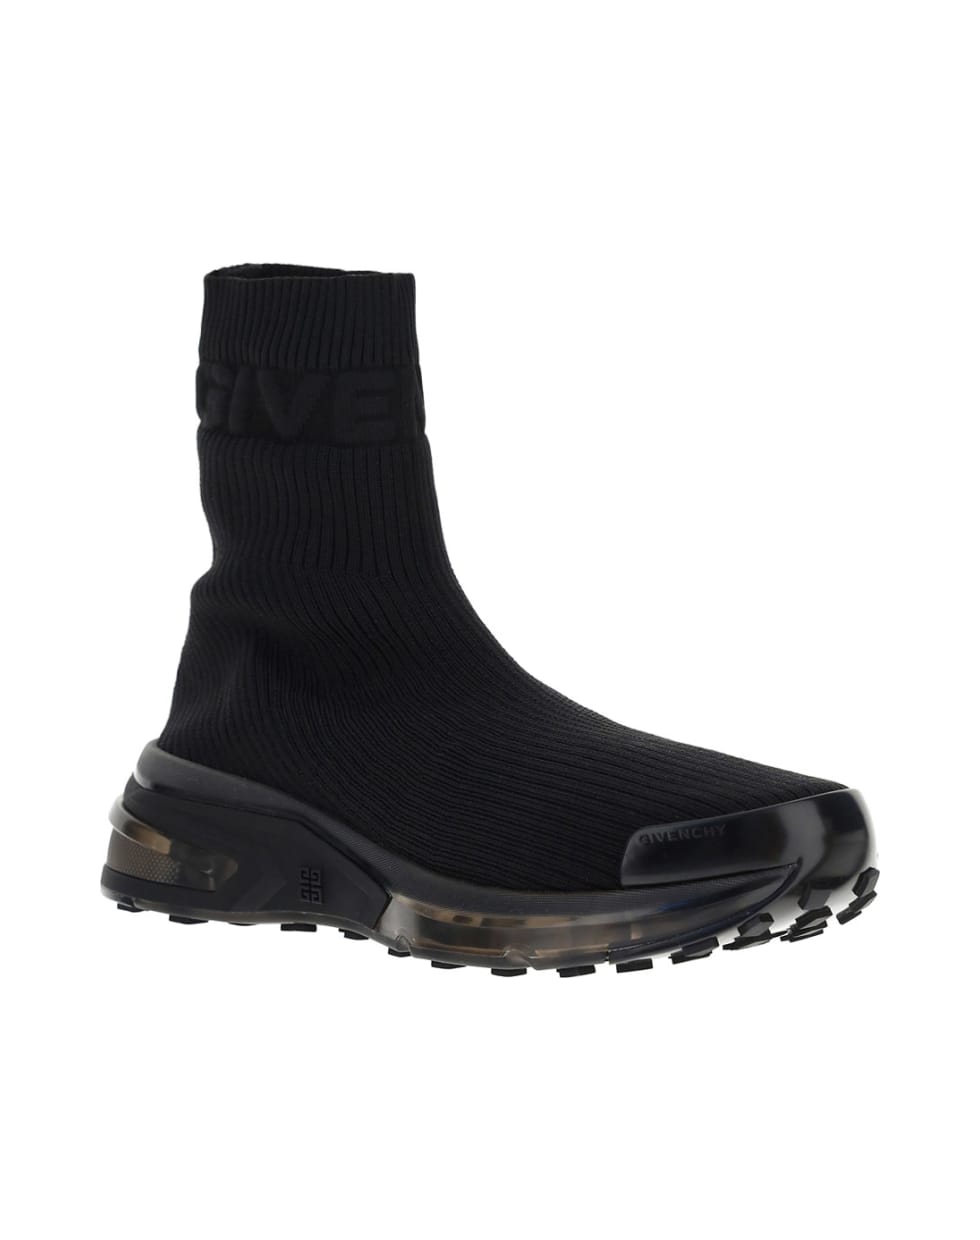 Givenchy Socks Sneakers - Black